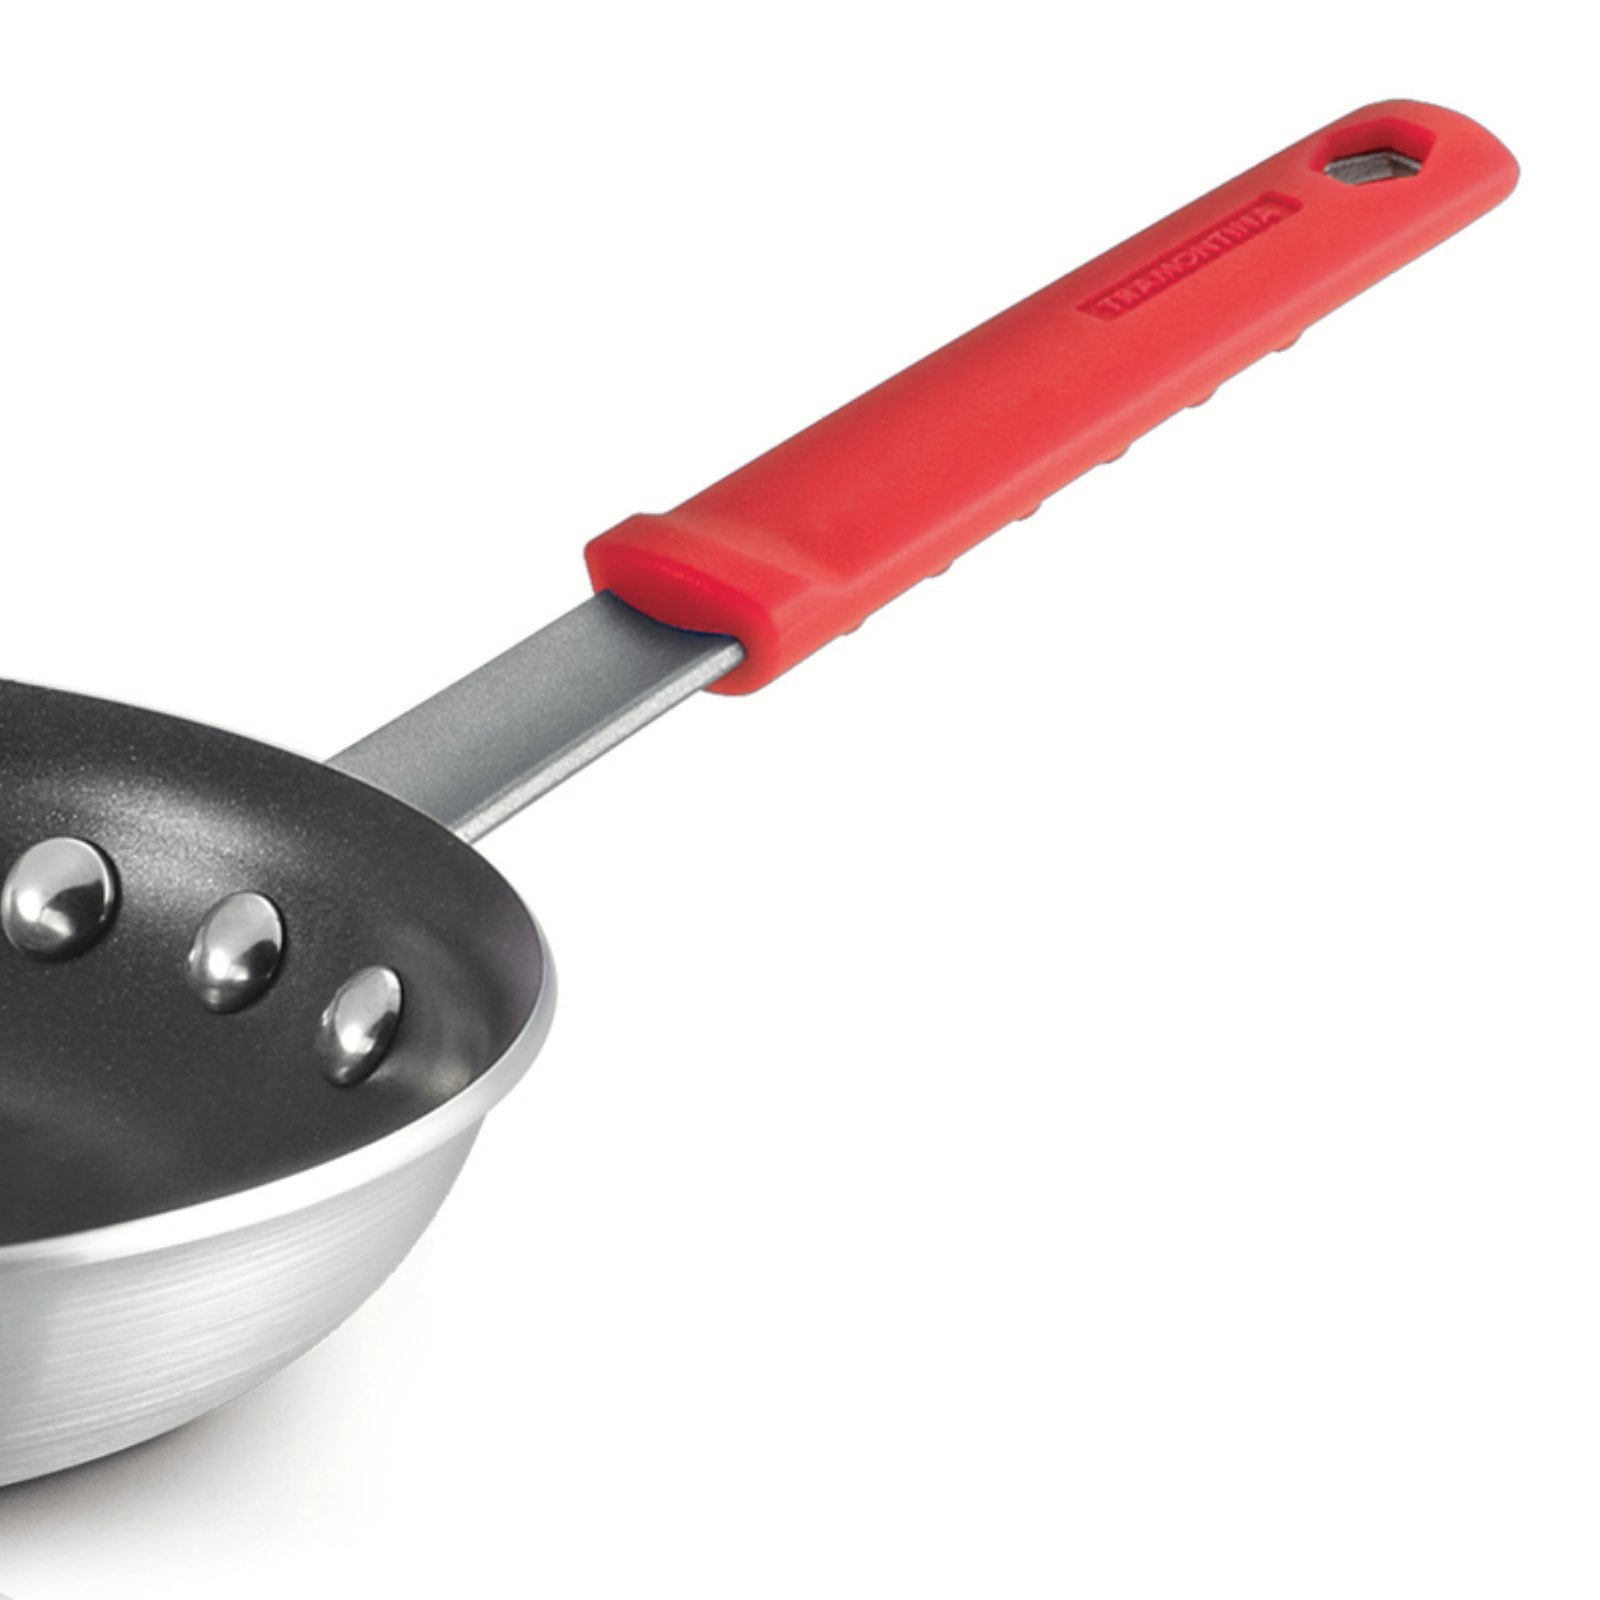  Tramontina Professional Fry Pans (8-inch): Home & Kitchen